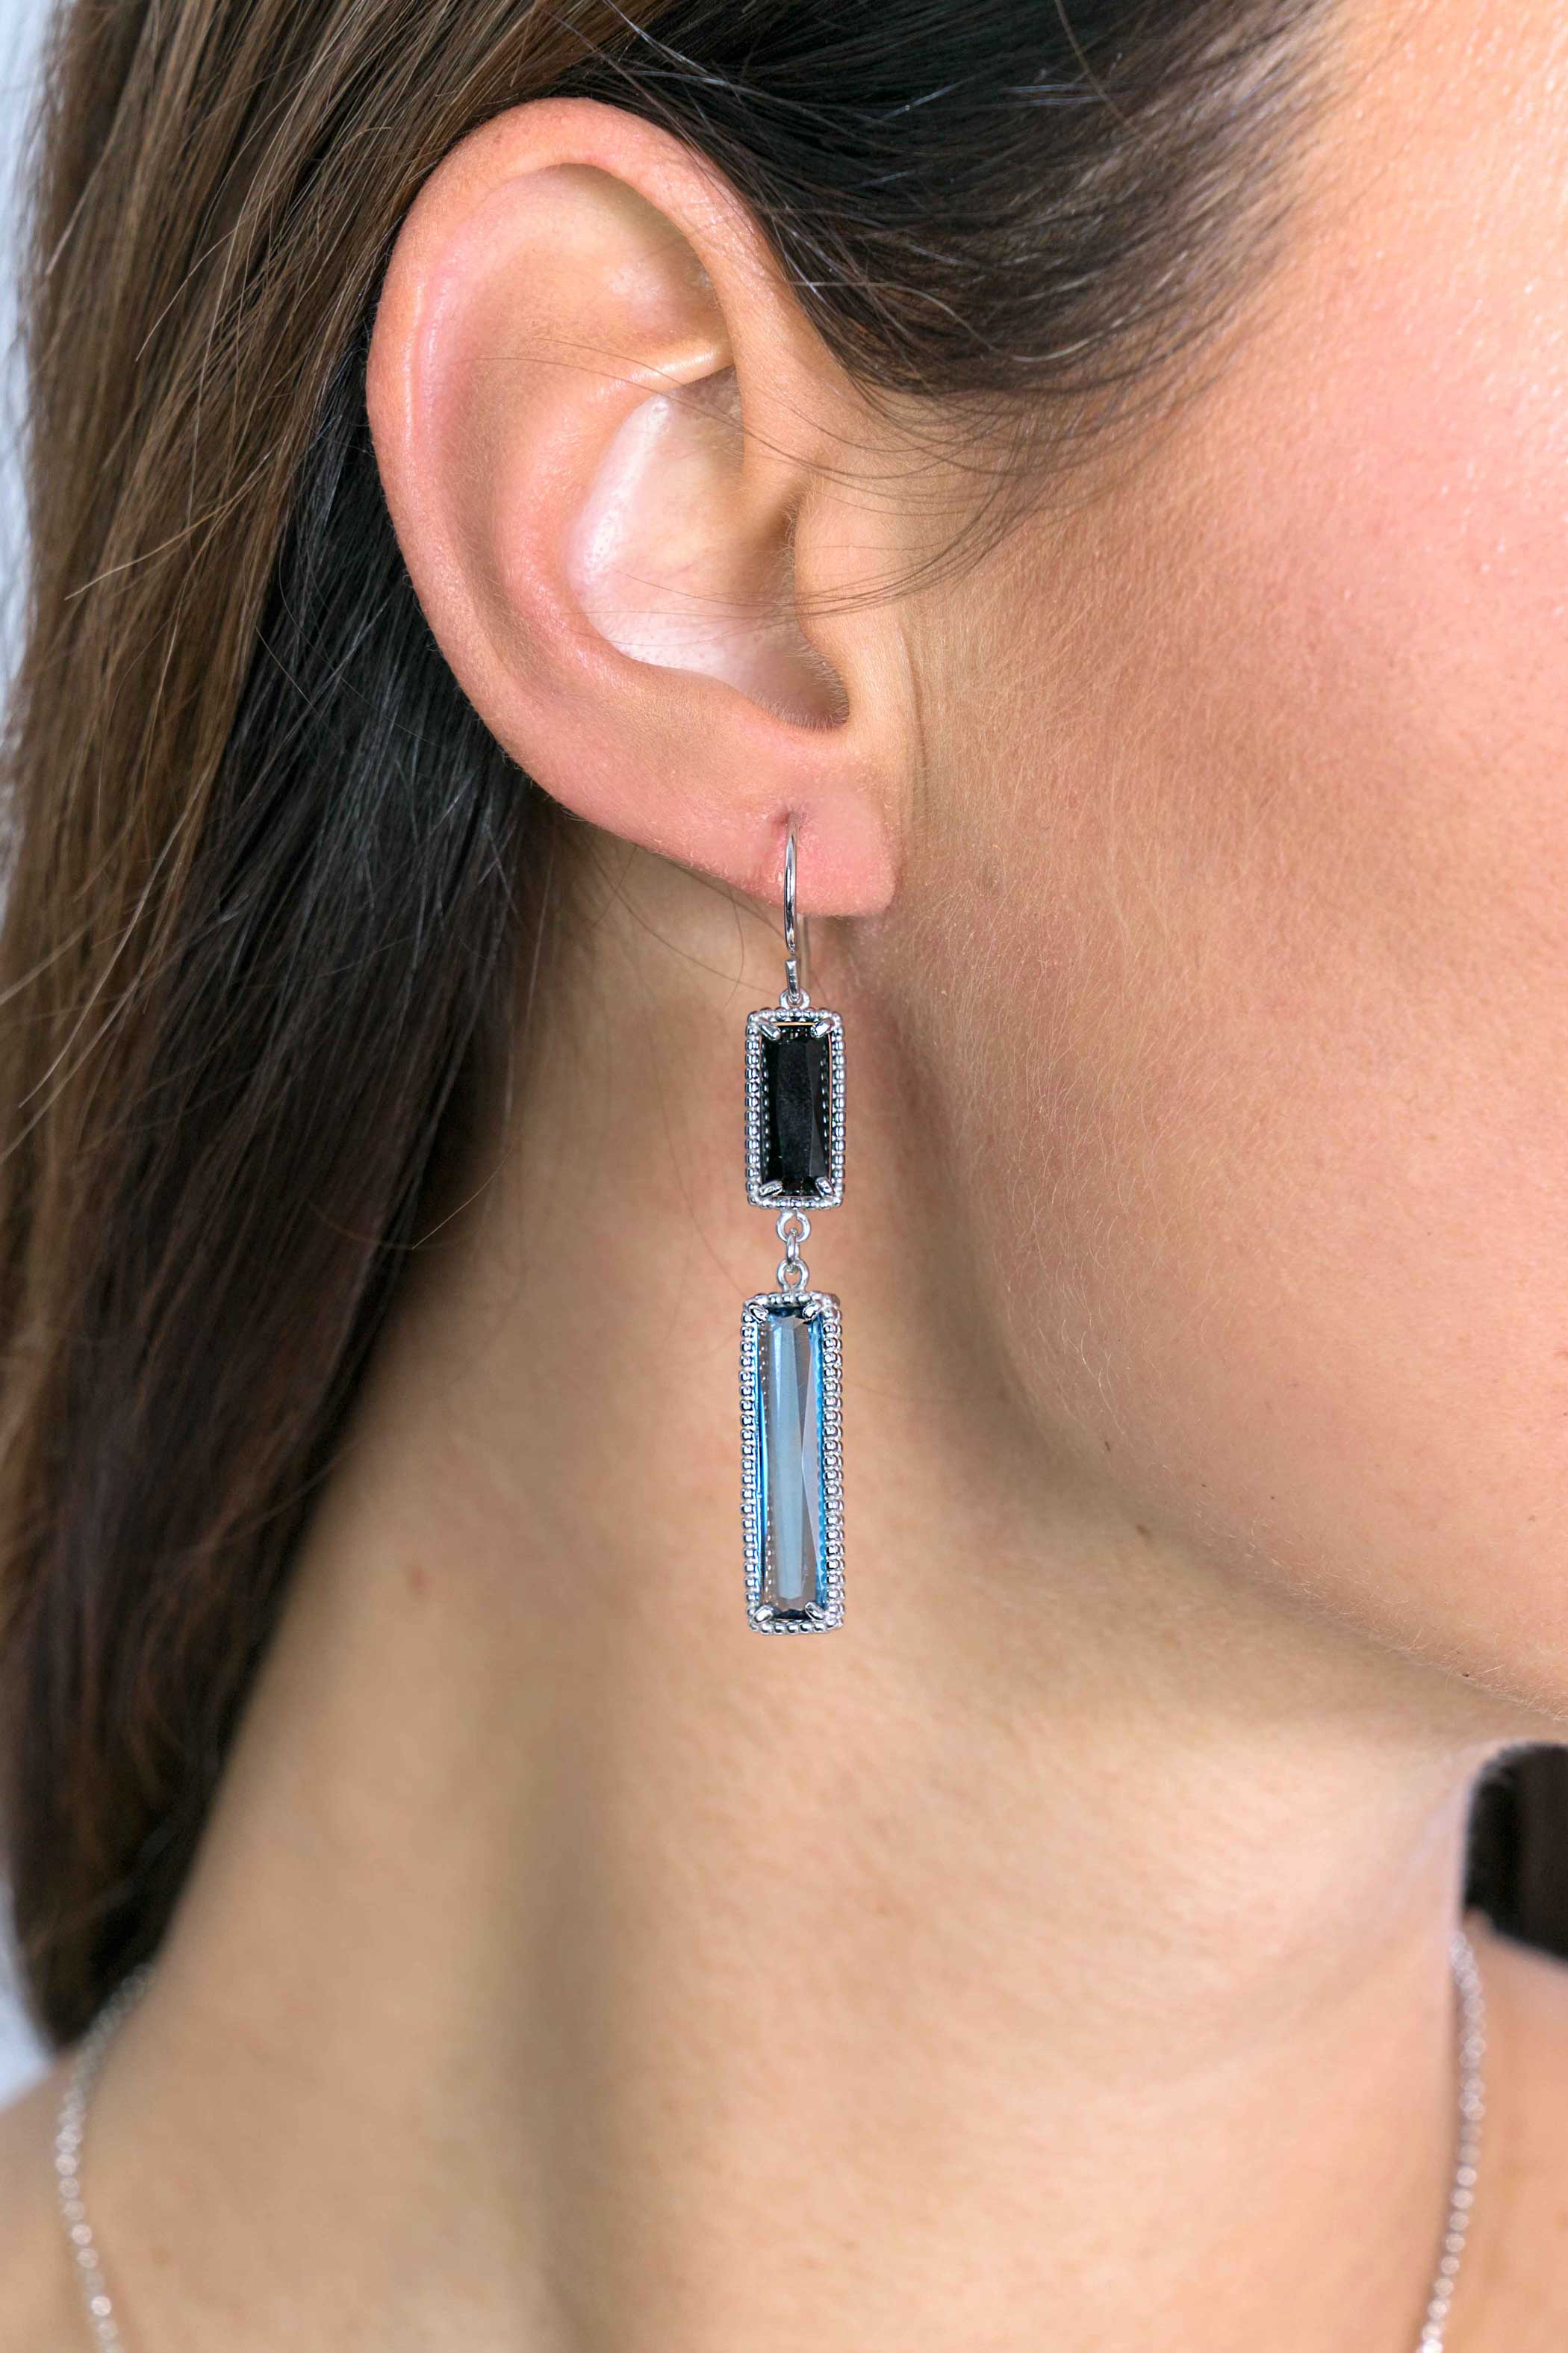 57mm ZINZI Sterling Silver Drop Earrings with Rectangular Settings Blue and Black ZIO2111